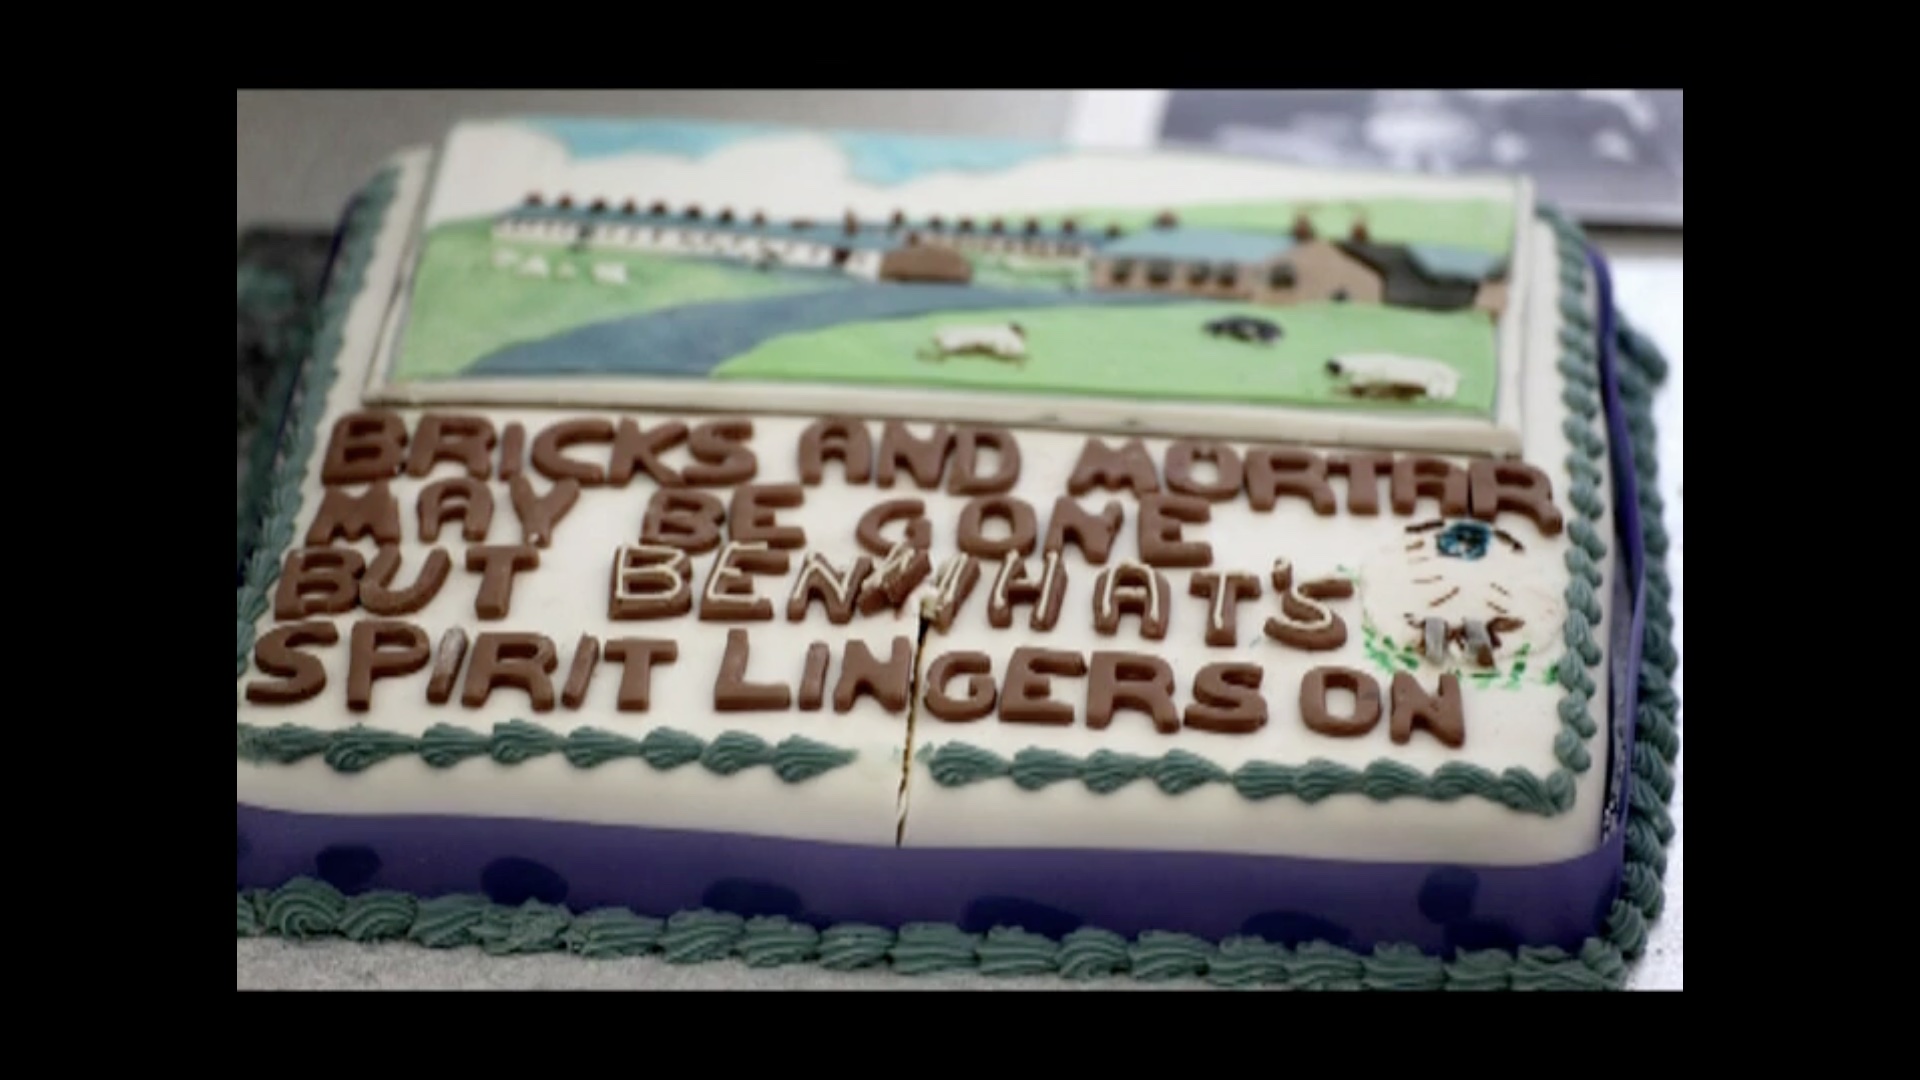 photo of a cake with a scene on it of grass hills, a row of houses and sheet. The message reads: Bricks and mortar may be gone but Benwhat's spirit lingers on. 